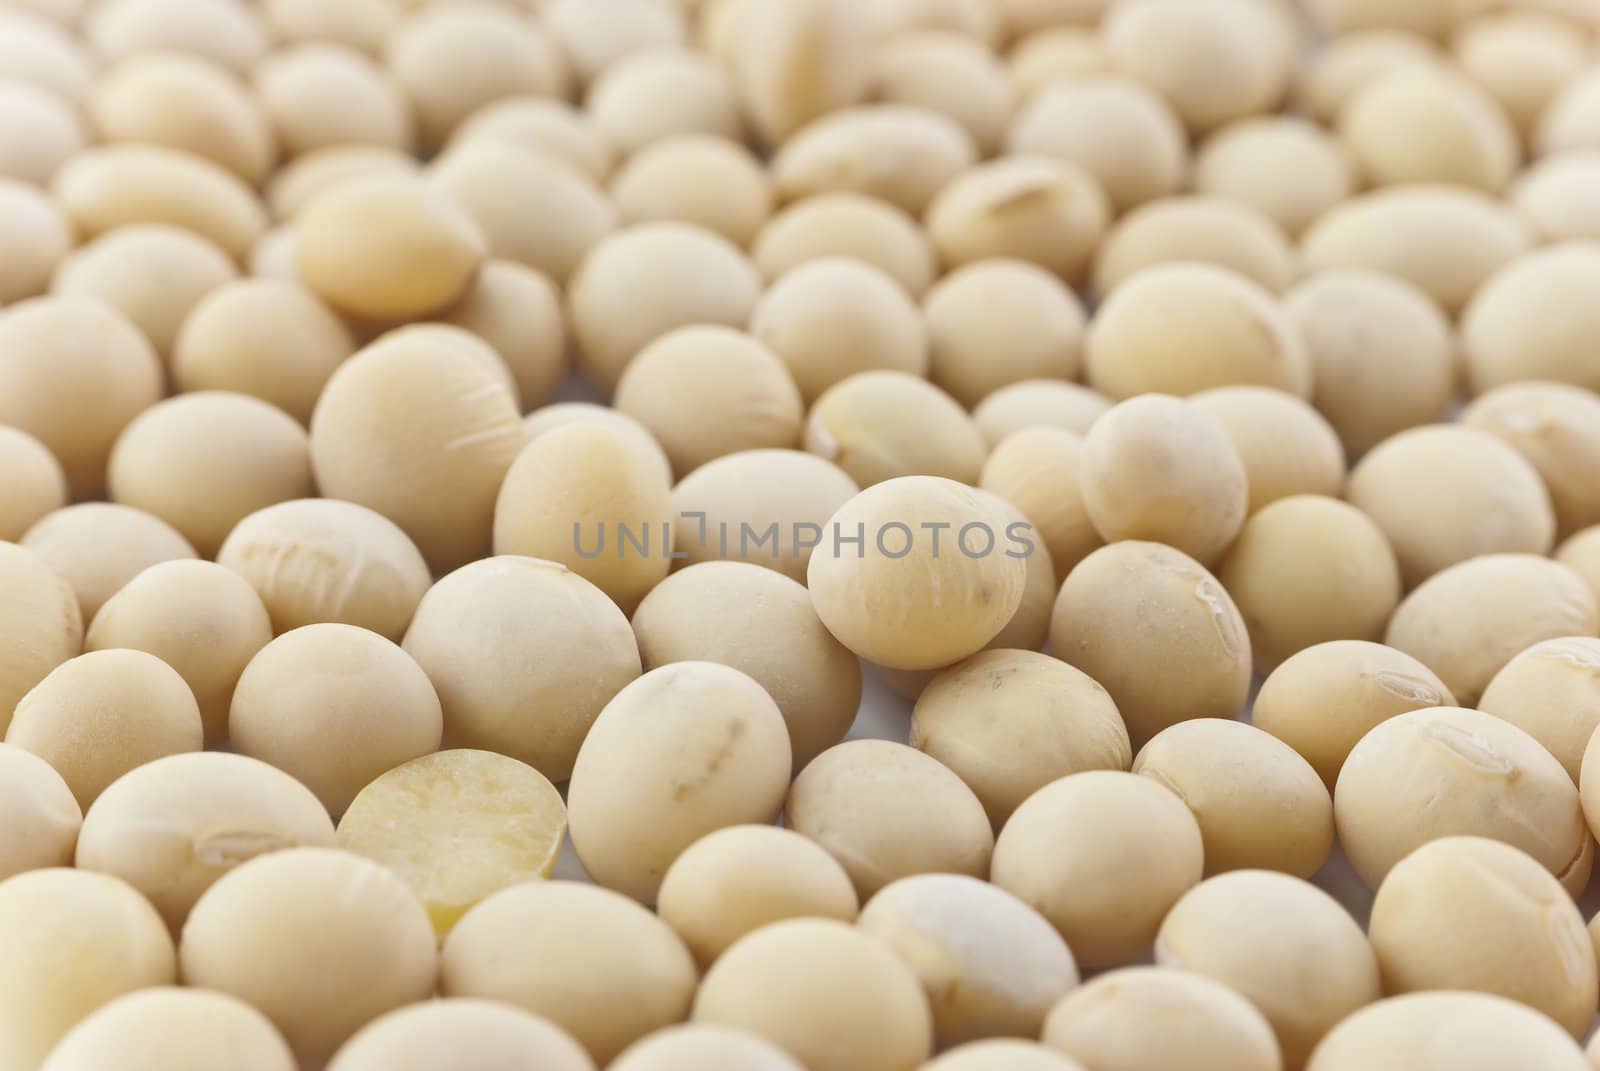 Macro (close-up) of soya beans filling whole frame.